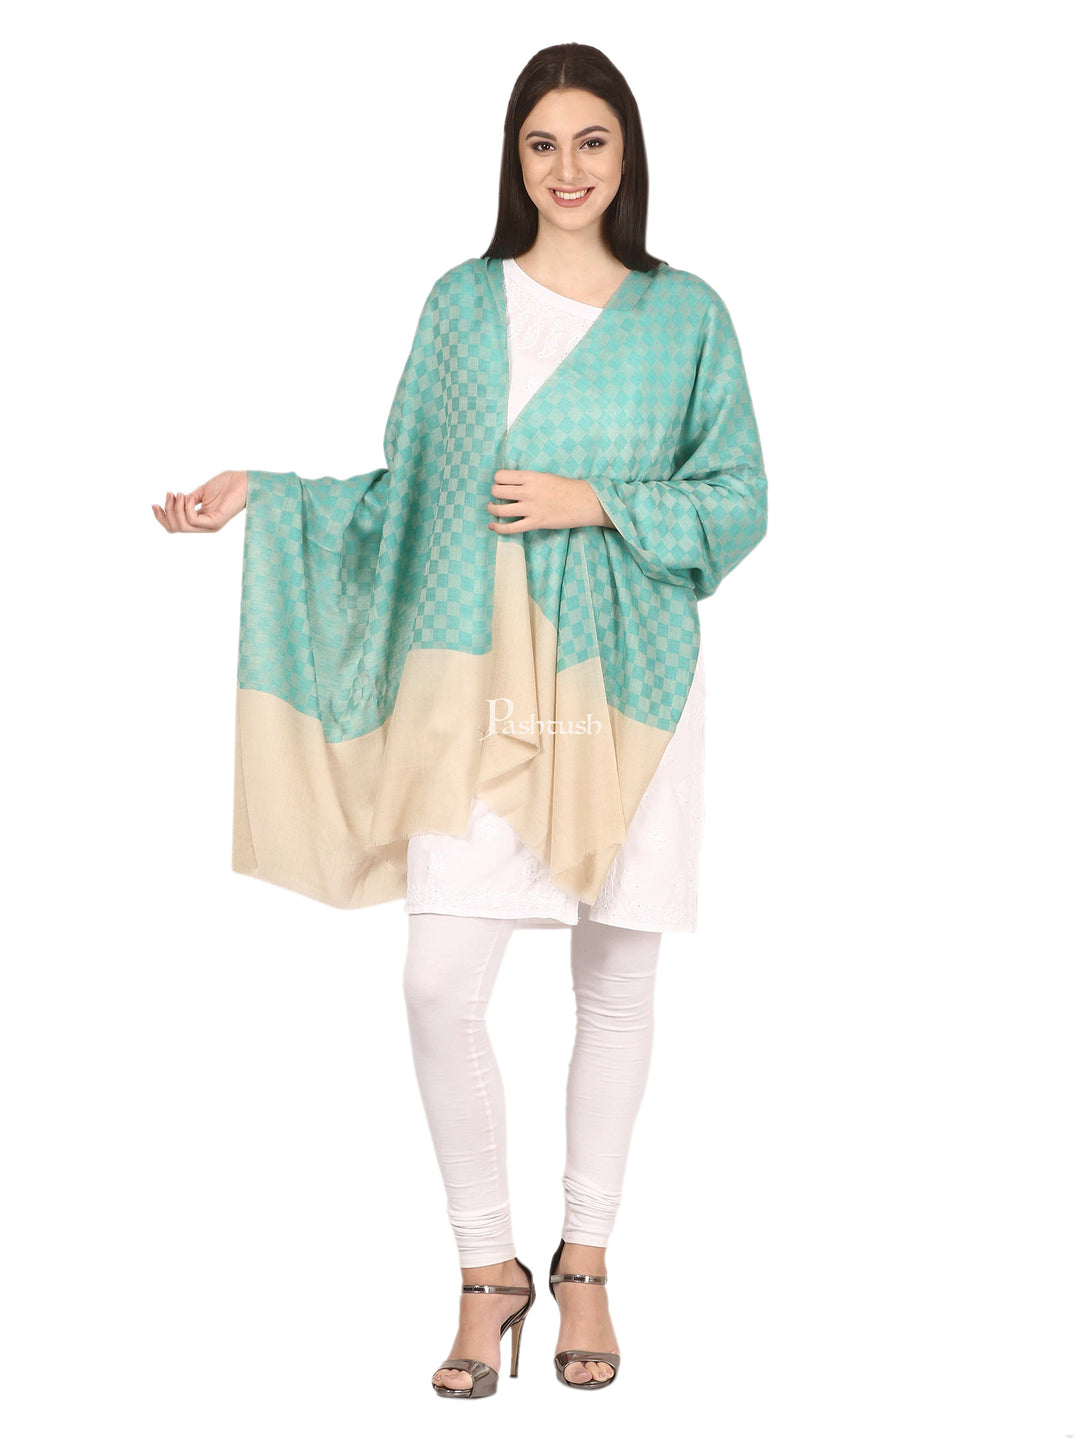 Pashtush India Gift Pack Pashtush His And Her Gift Set Of Check Stoles With Premium Gift Box Packaging, Beige and Sea Green